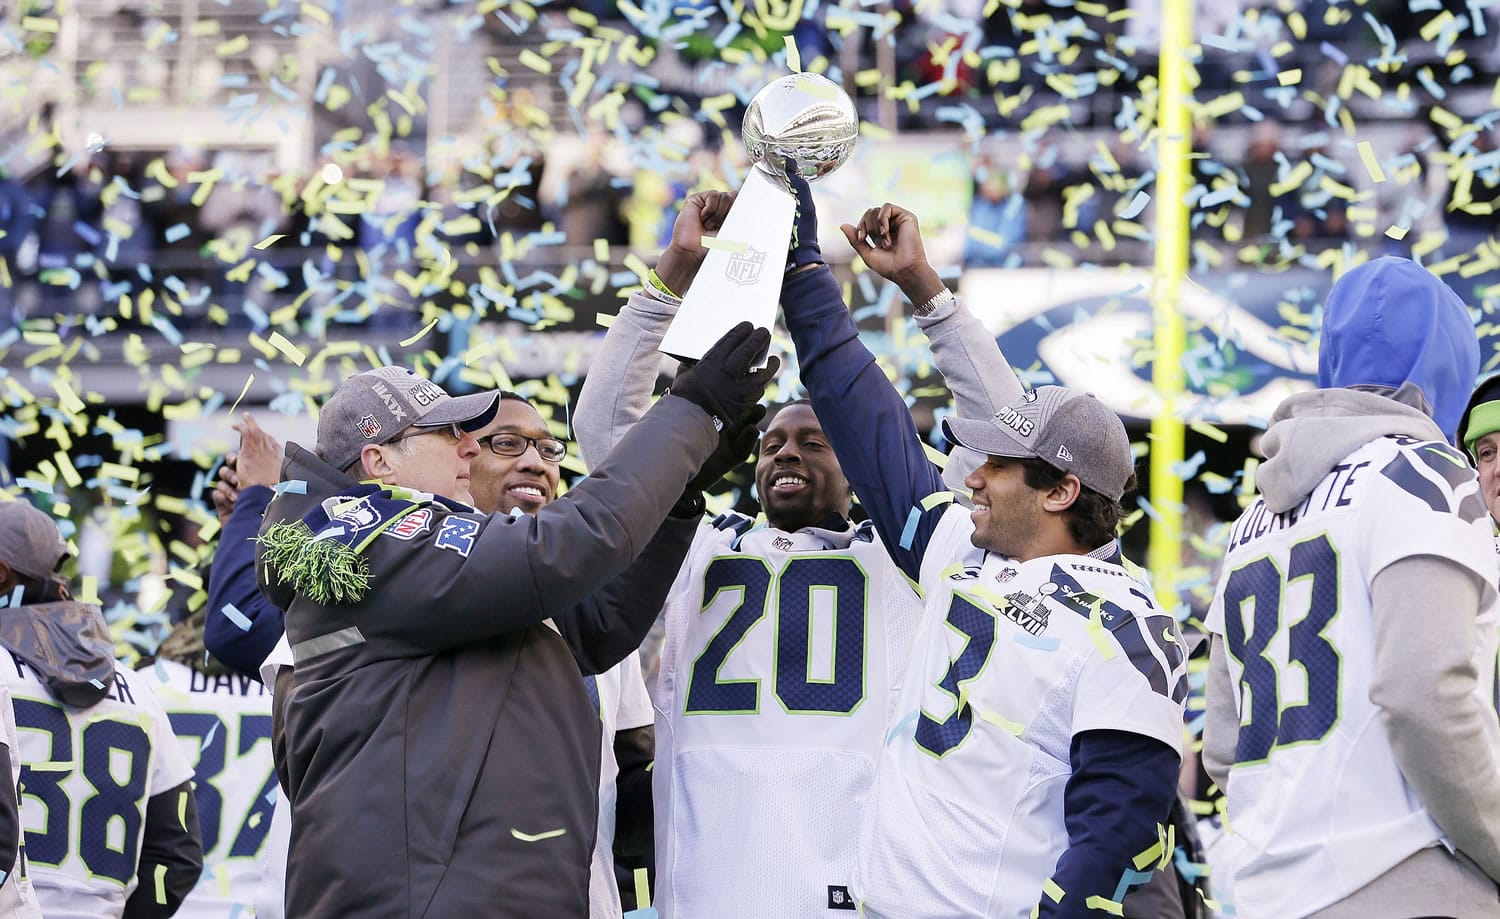 The Seahawks may have a difficult time raising a second consecutive Vince Lombardi Trophy. ... Or maybe they won't.